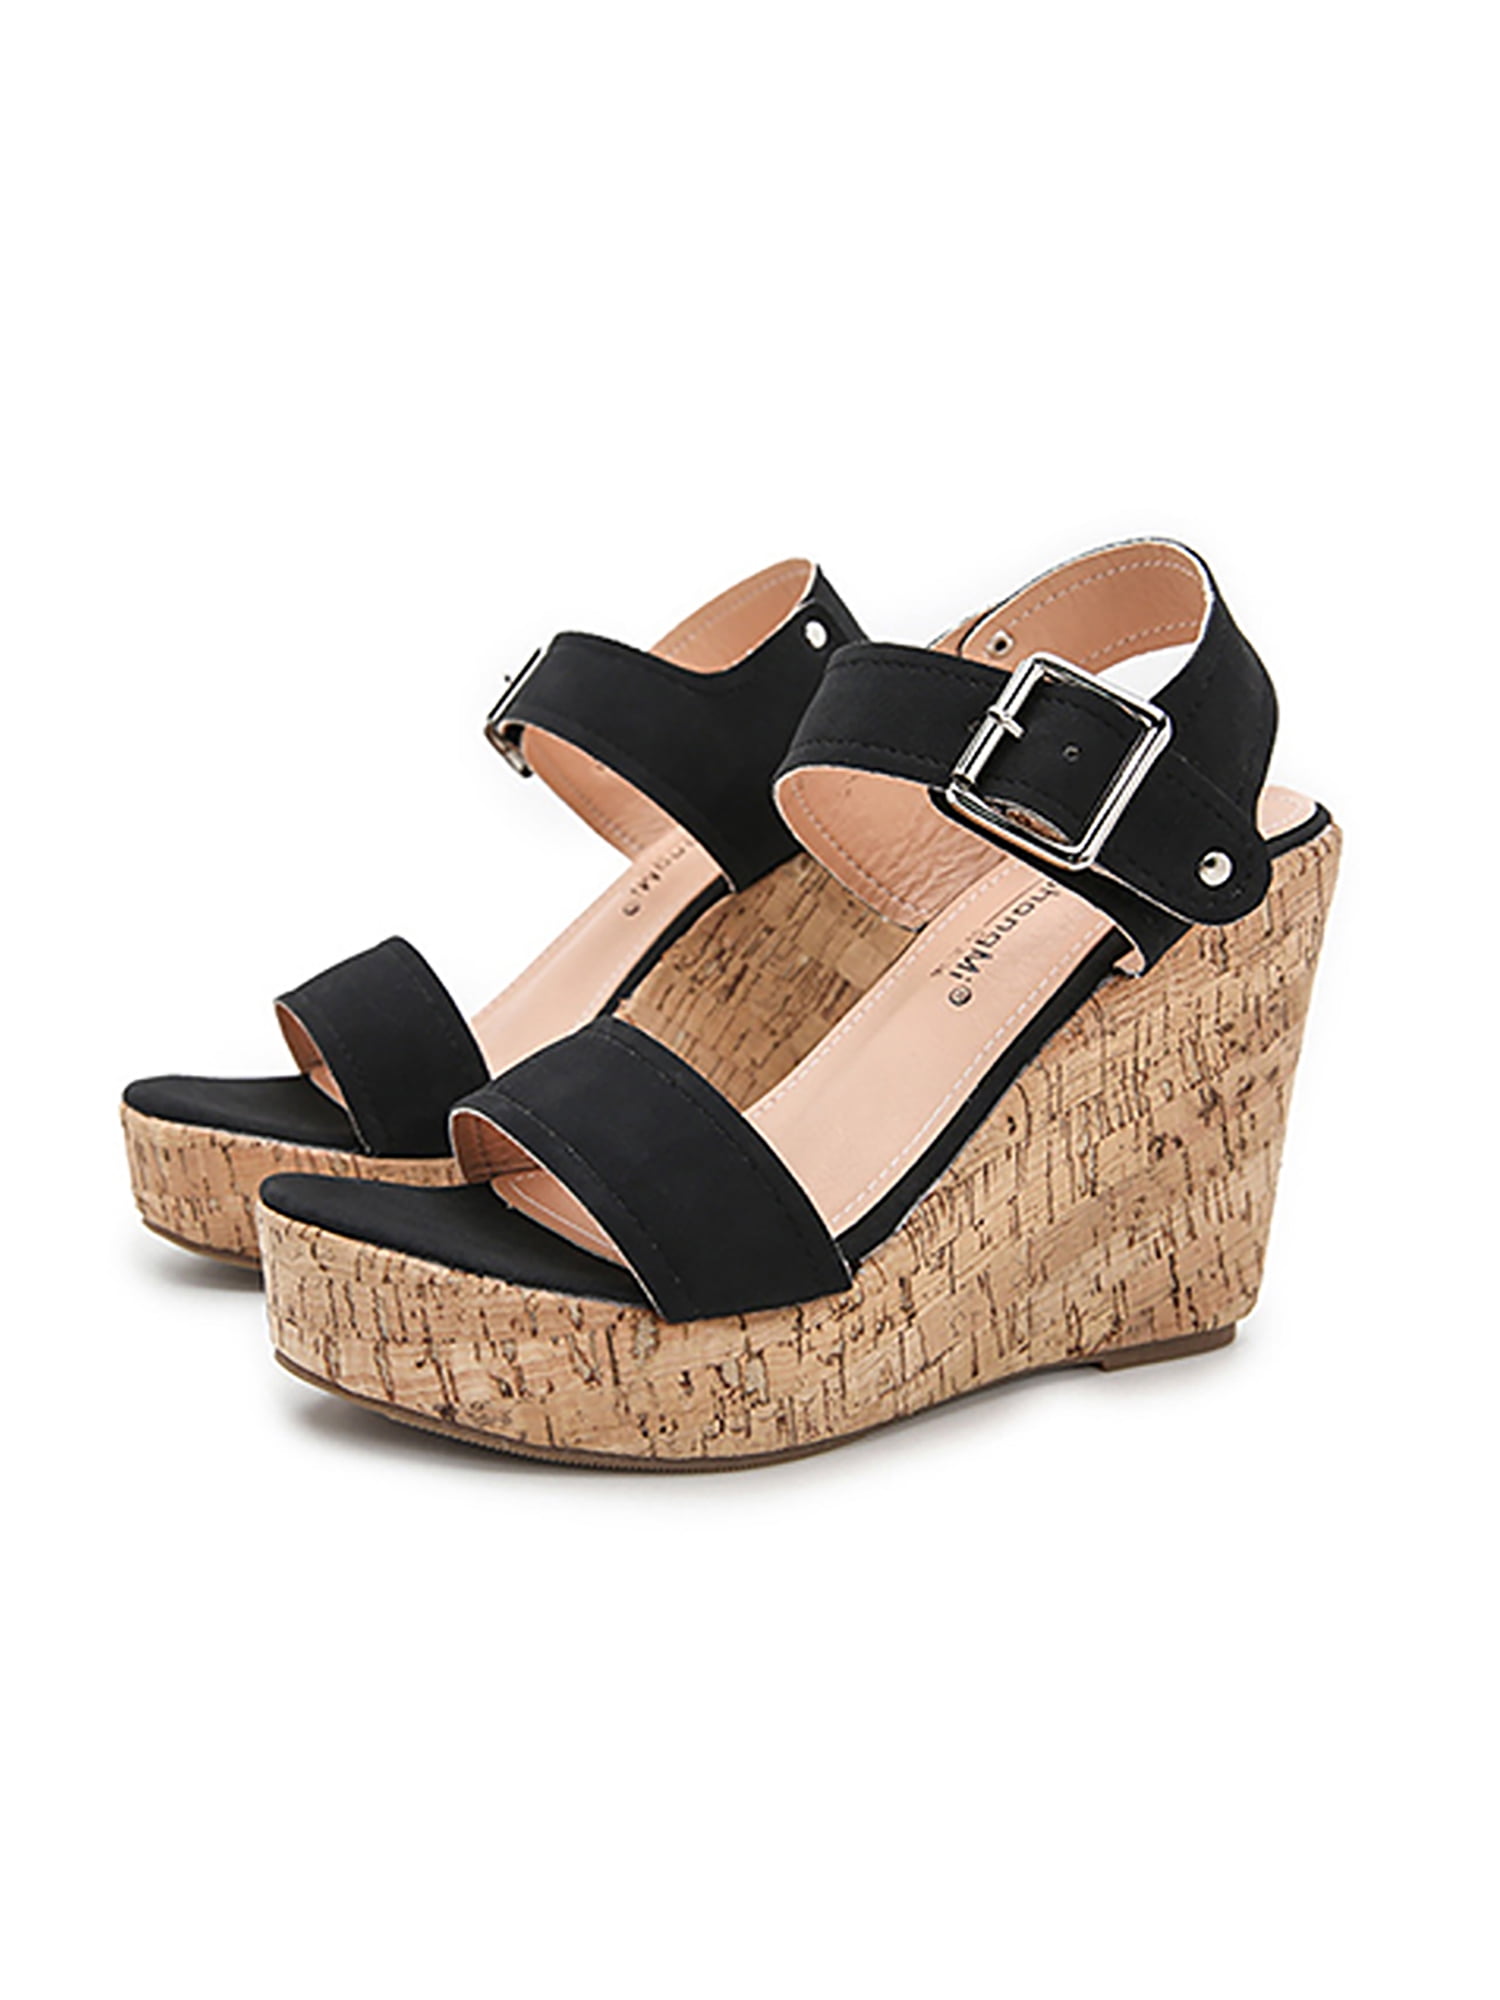 Details about    Women’s Wedge Heel Peep-Toe Ankle Strap Buckle Sandals Casual Shoes Vintage Hot 